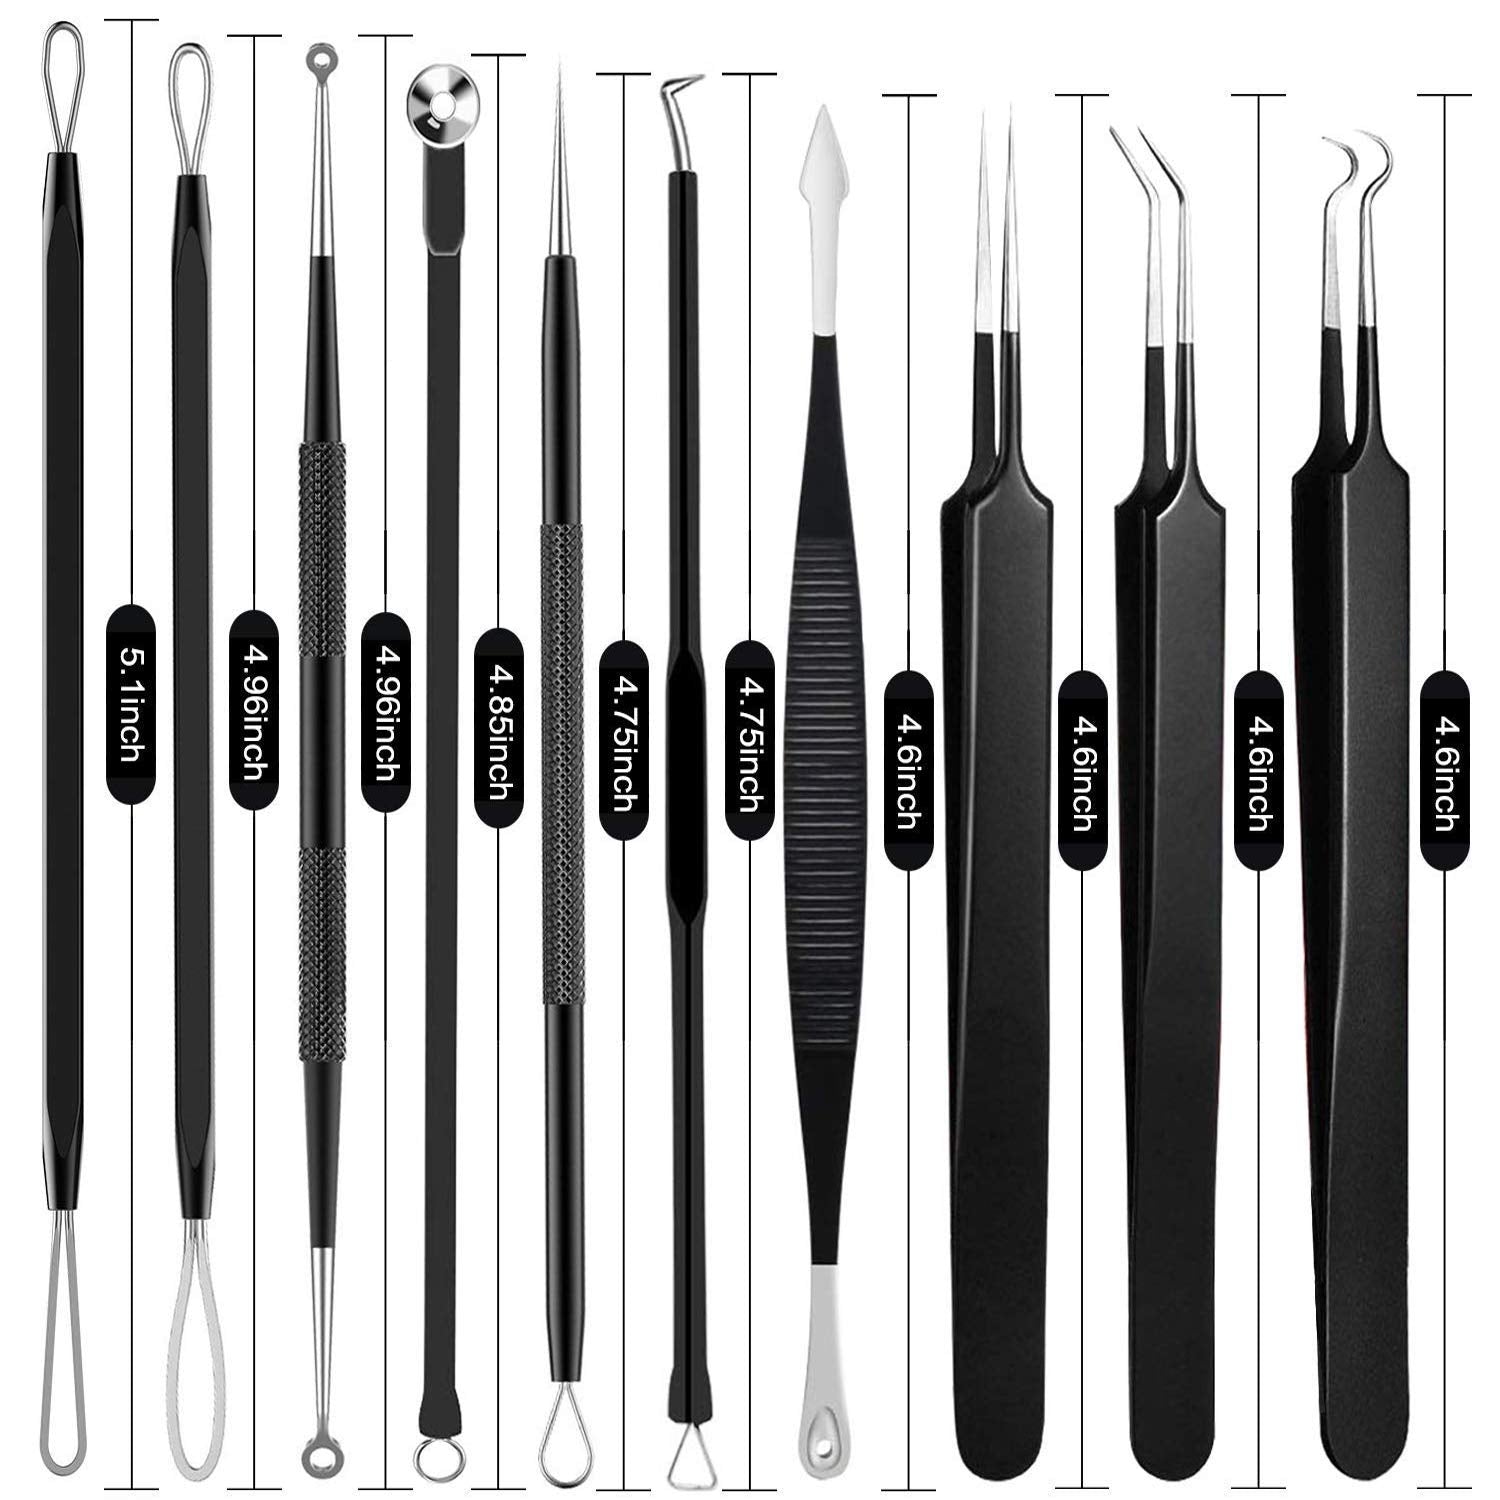 Size measurements for 10 pimple popper tools. The sizes range from, 4.6 inches to 5.1 inches.